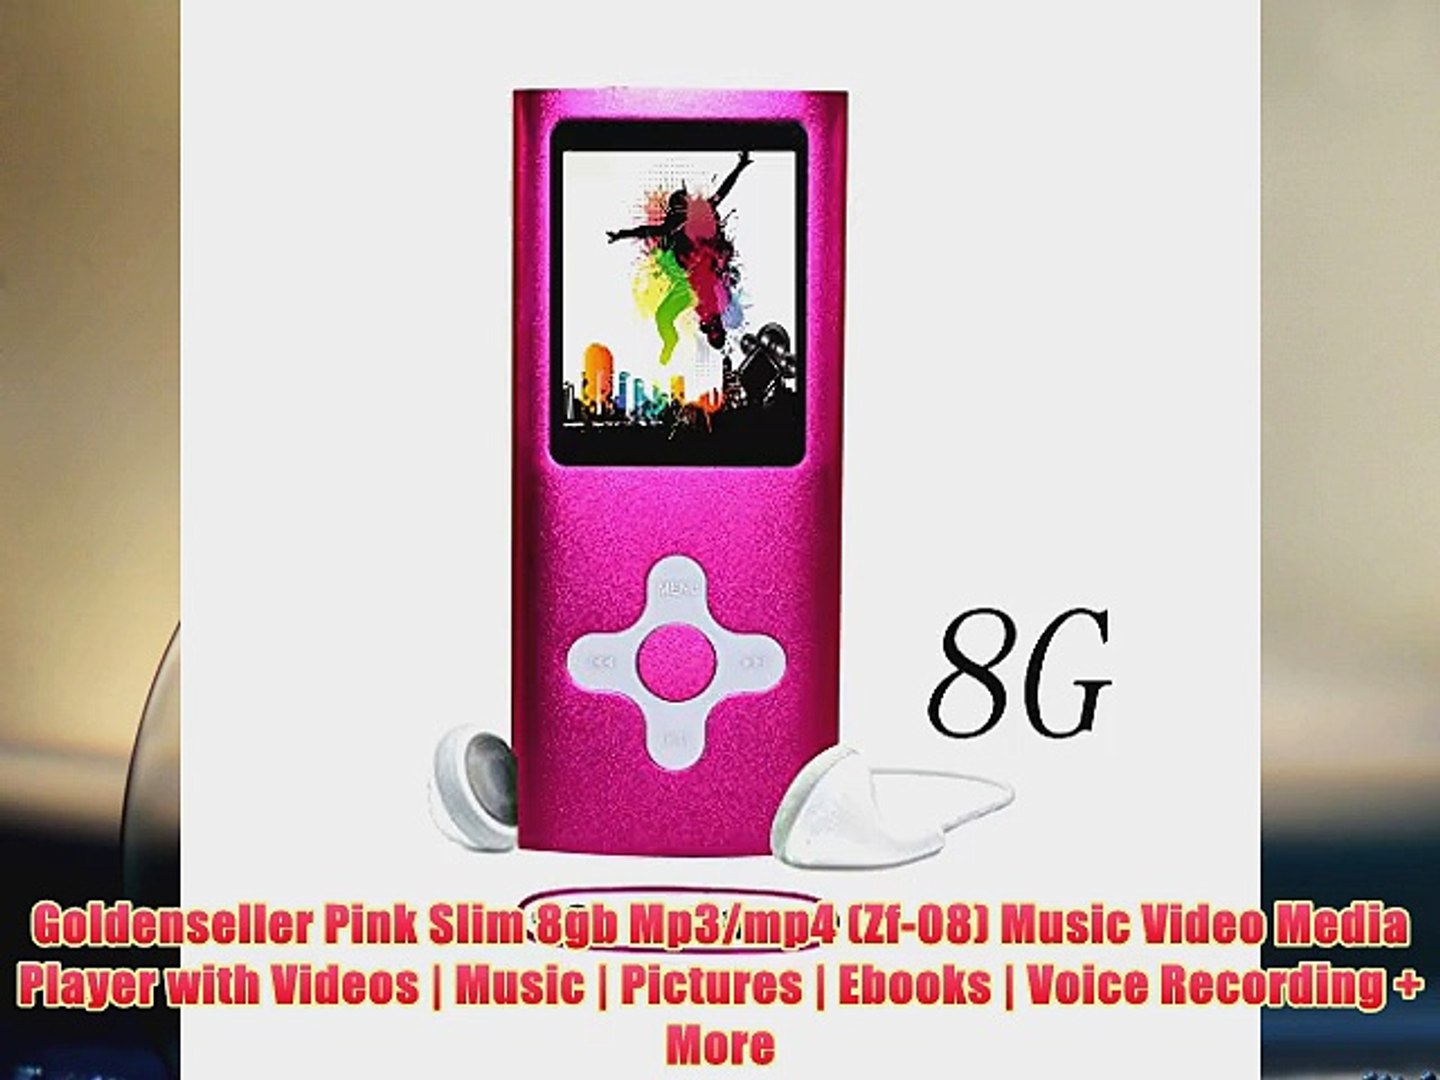 Goldenseller Pink Slim 8gb Mp3mp4 Zf08 Music Video Media Player with Videos Music Pictures Ebooks Vo